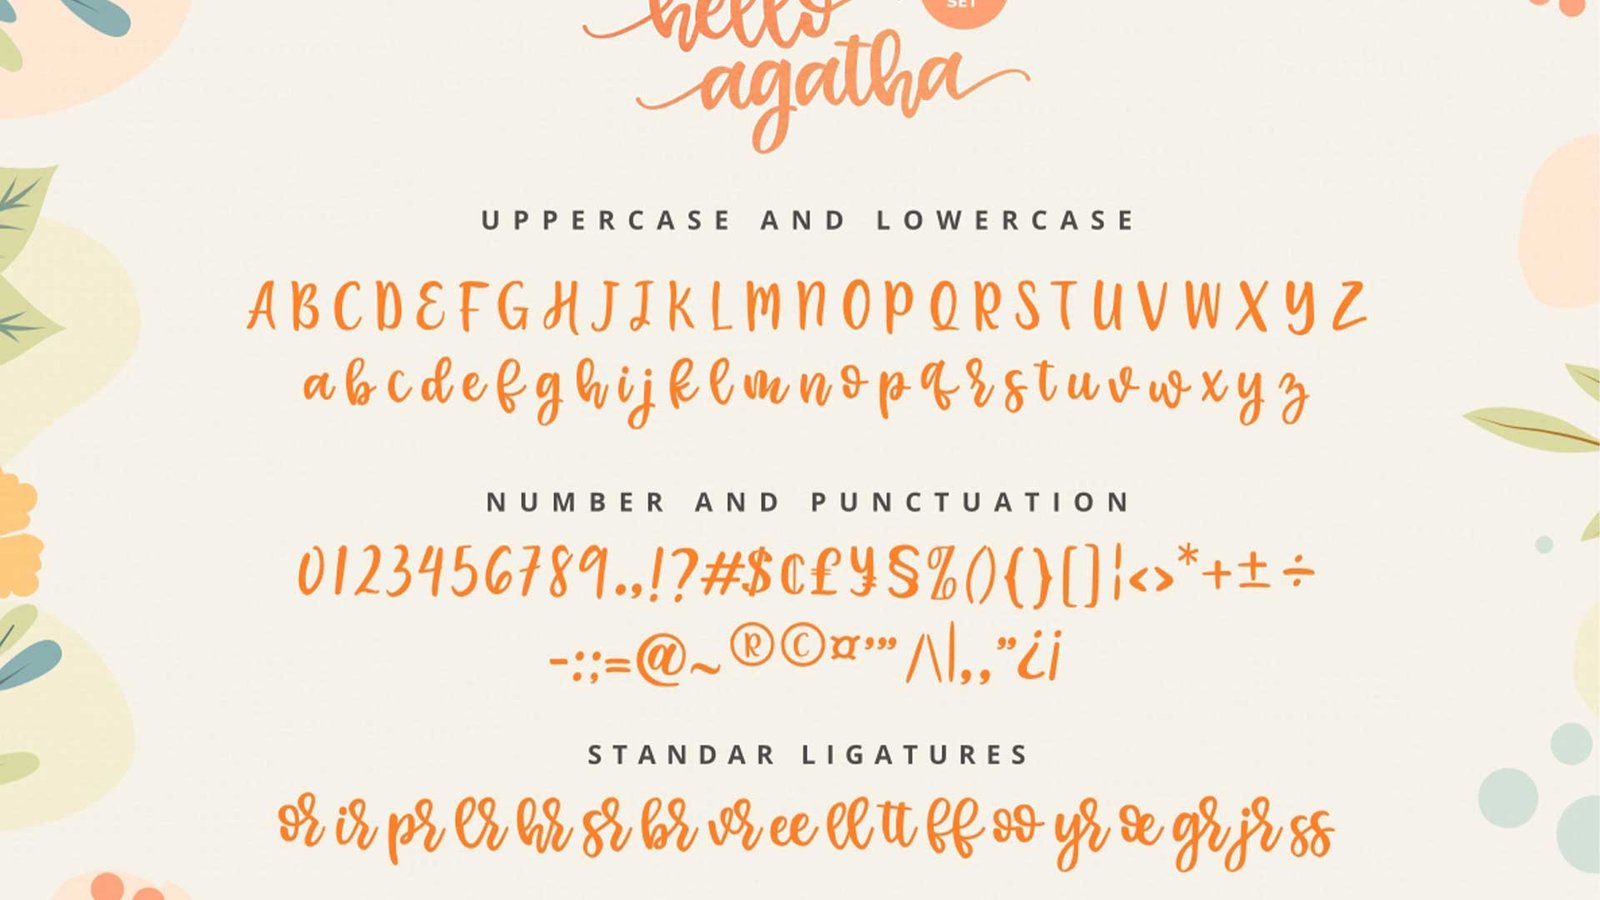 Best Free Procreate Fonts for Design